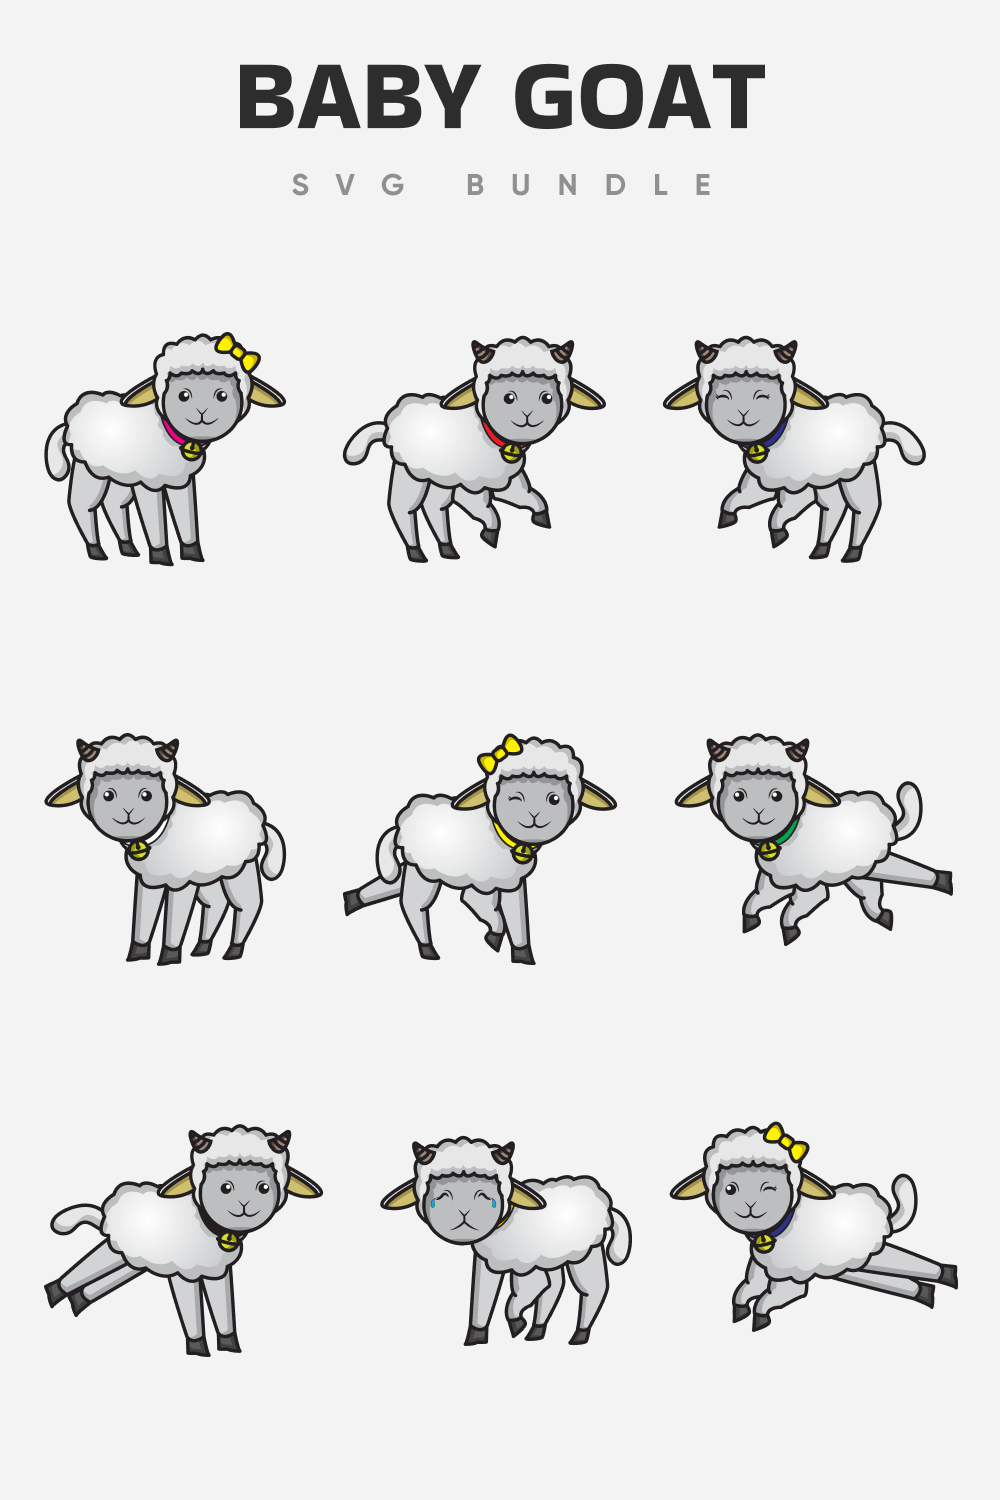 Baby Goat with yellow bows and bells around their necks.